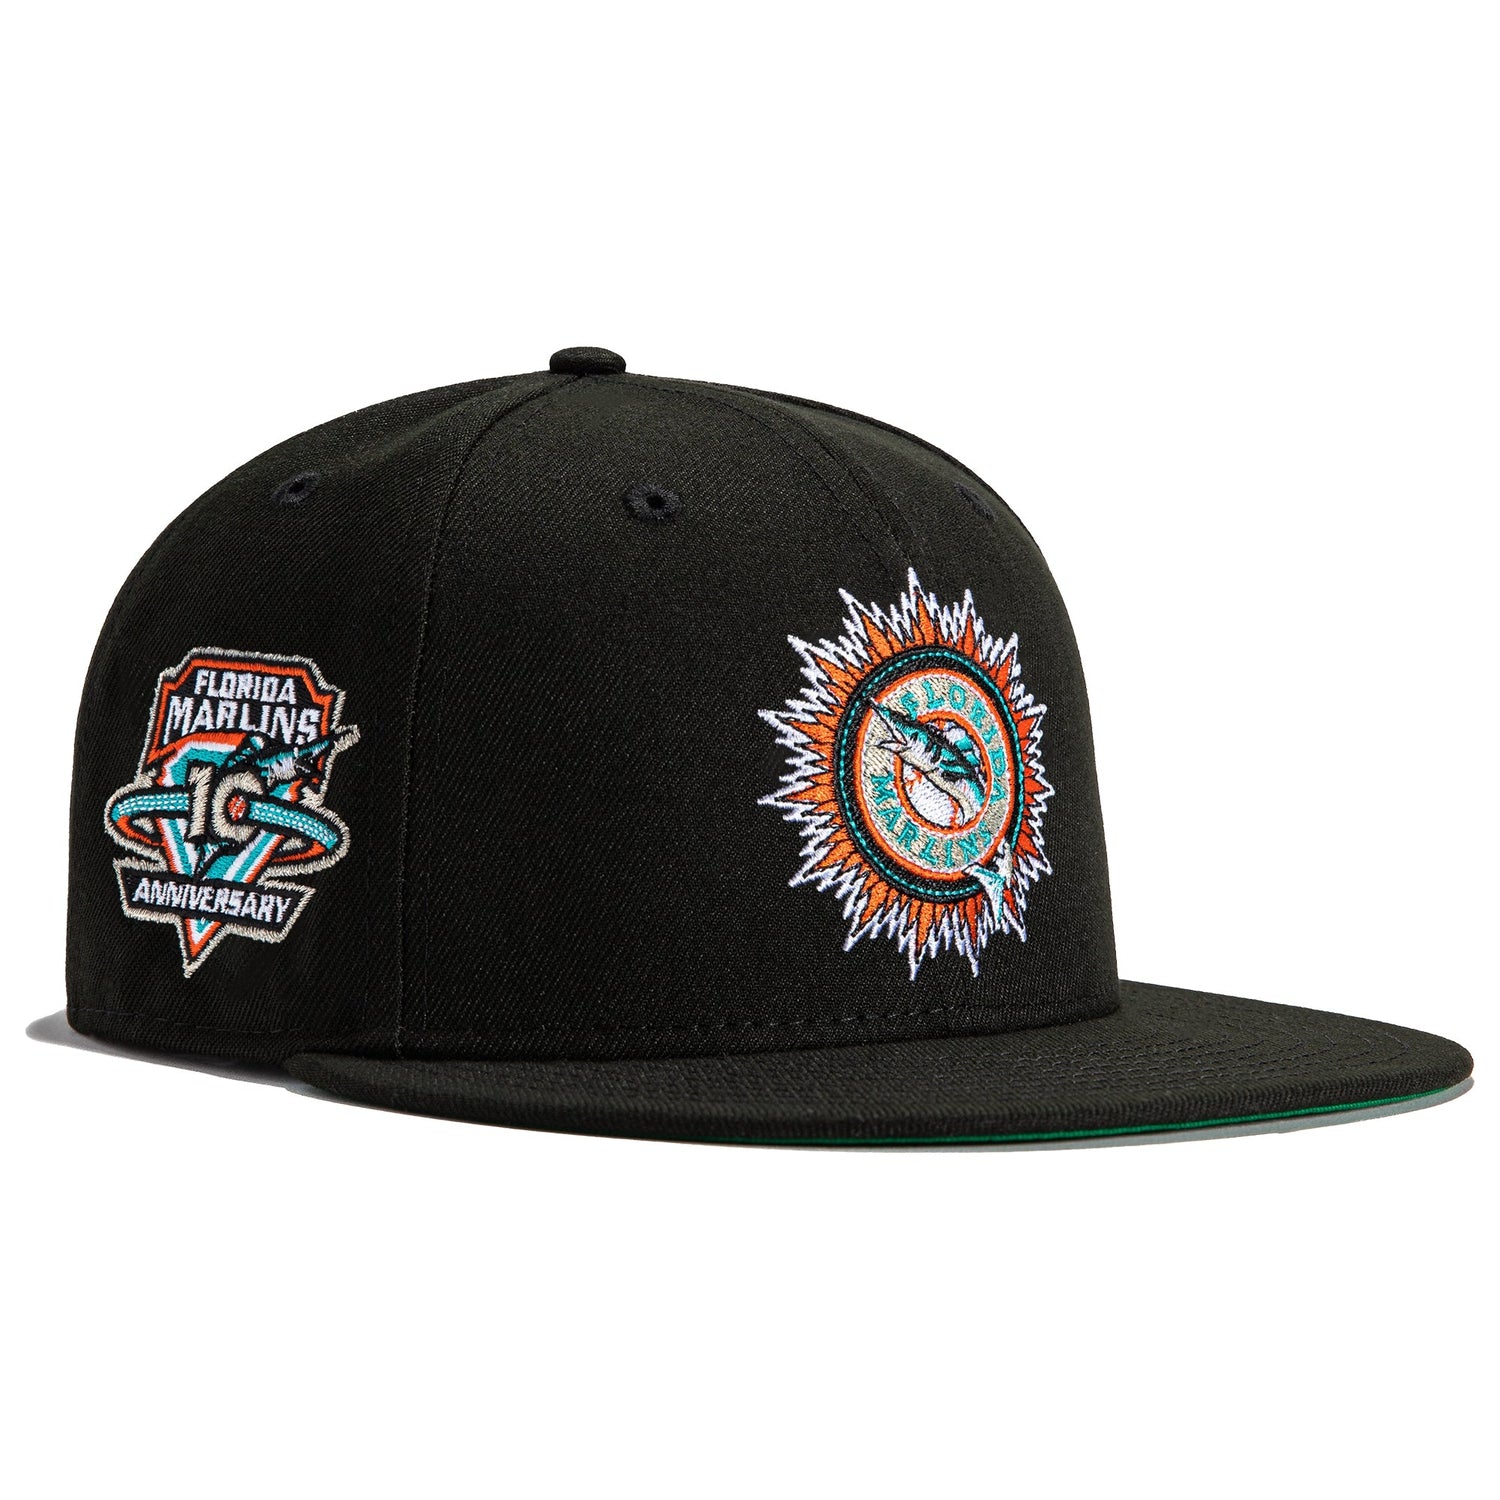 Miami Marlins on X: Not want, NEED! The New Era Team Store at Marlins Park  has all kinds of gear for the 25th Anniversary Weekend June 8-10. Pick up  your merch before